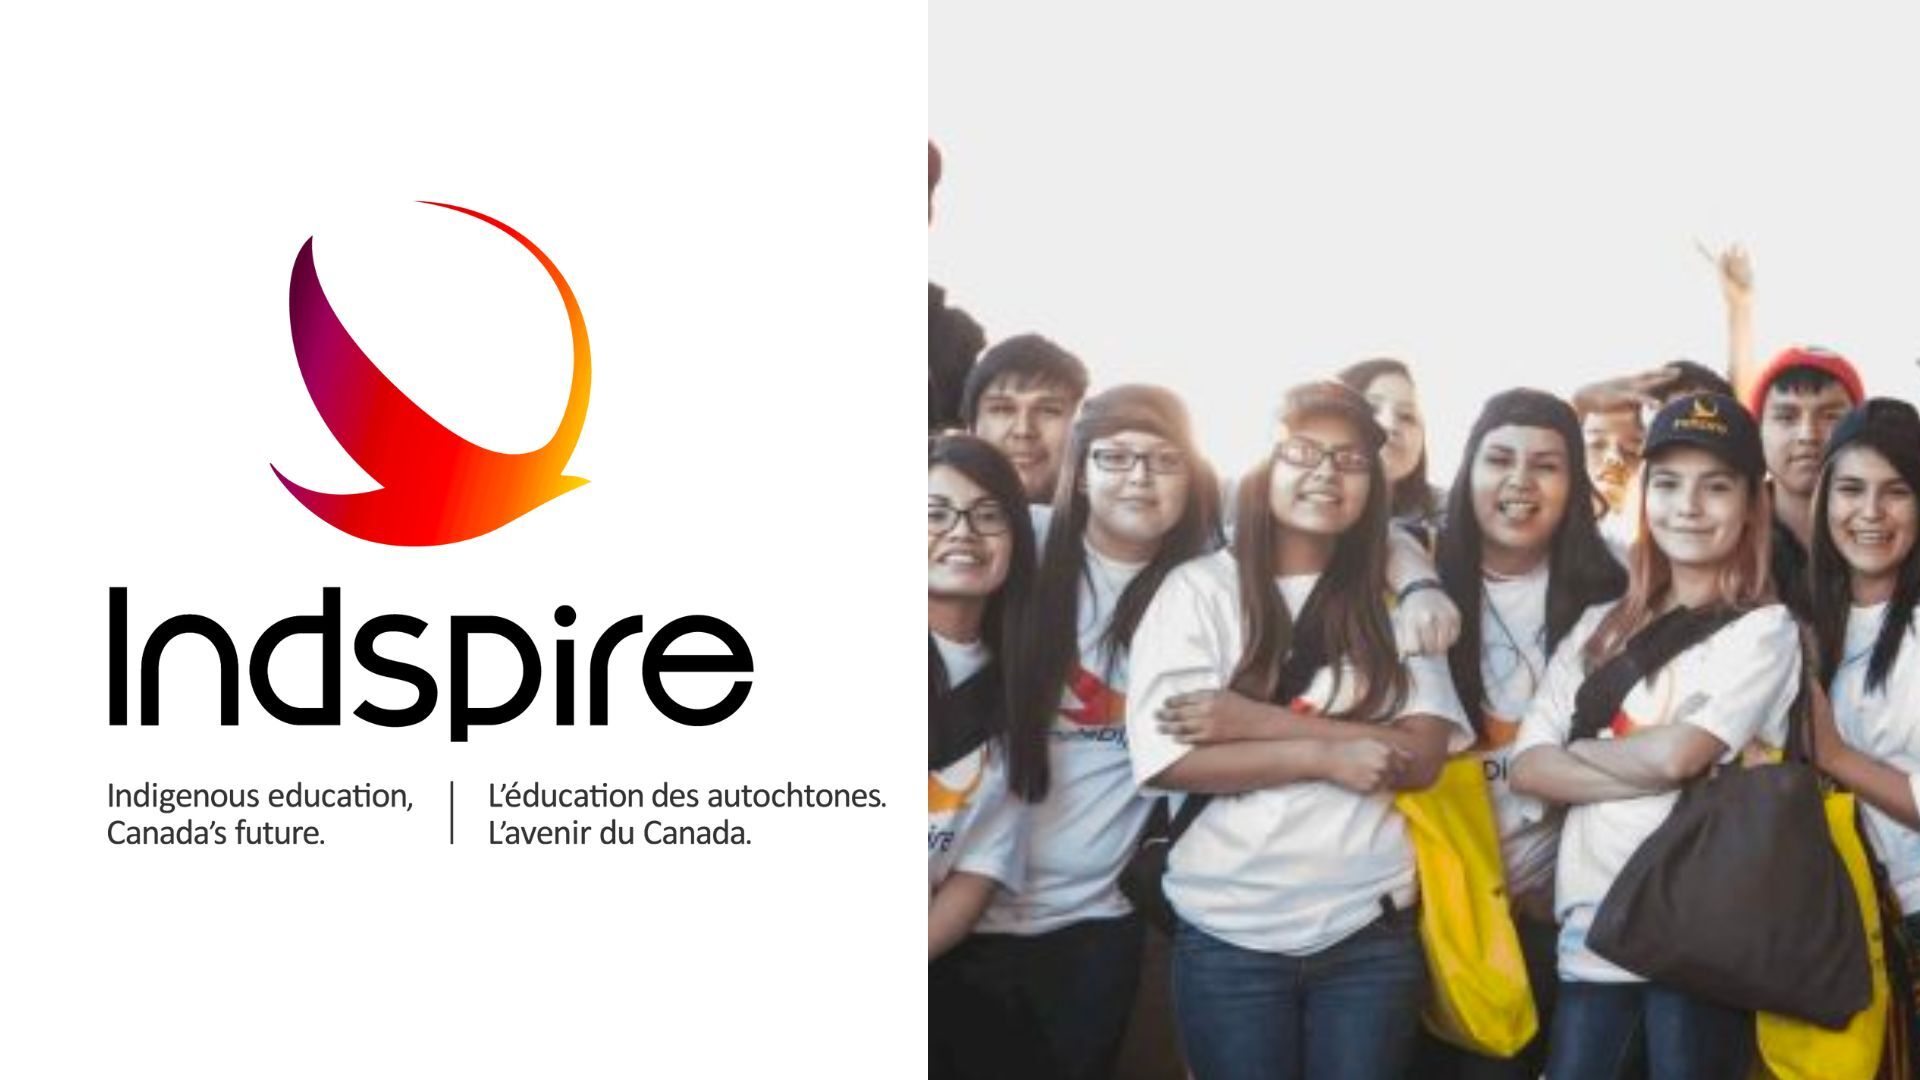 This incredible bursary is helping support 215 Indigenous post-secondary students